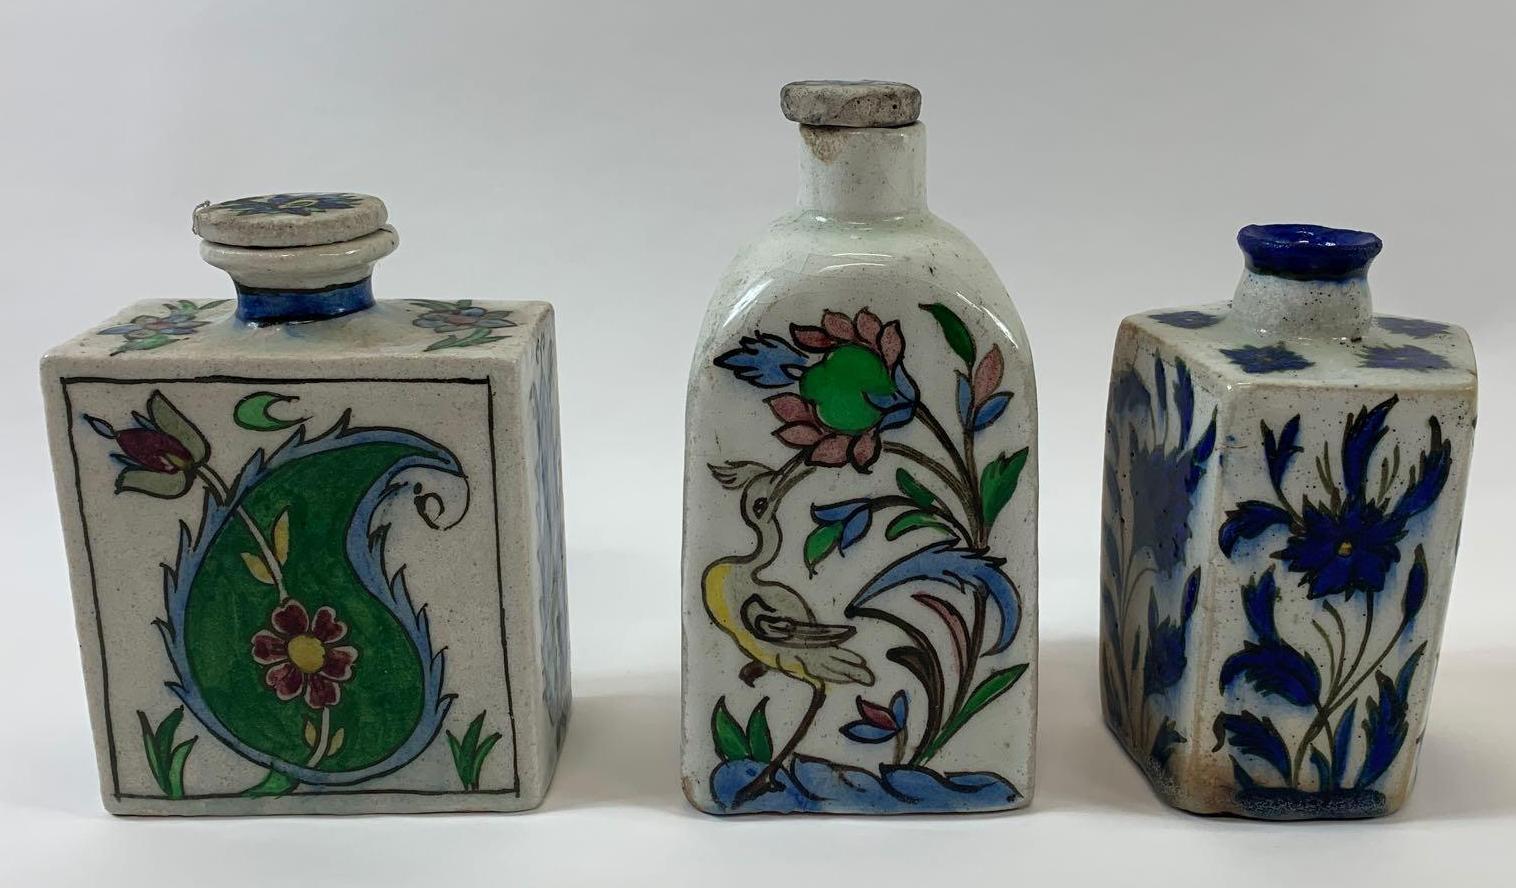 Three Turkish Iznik/Persian pottery flasks, two decorated with various flowers, plants and